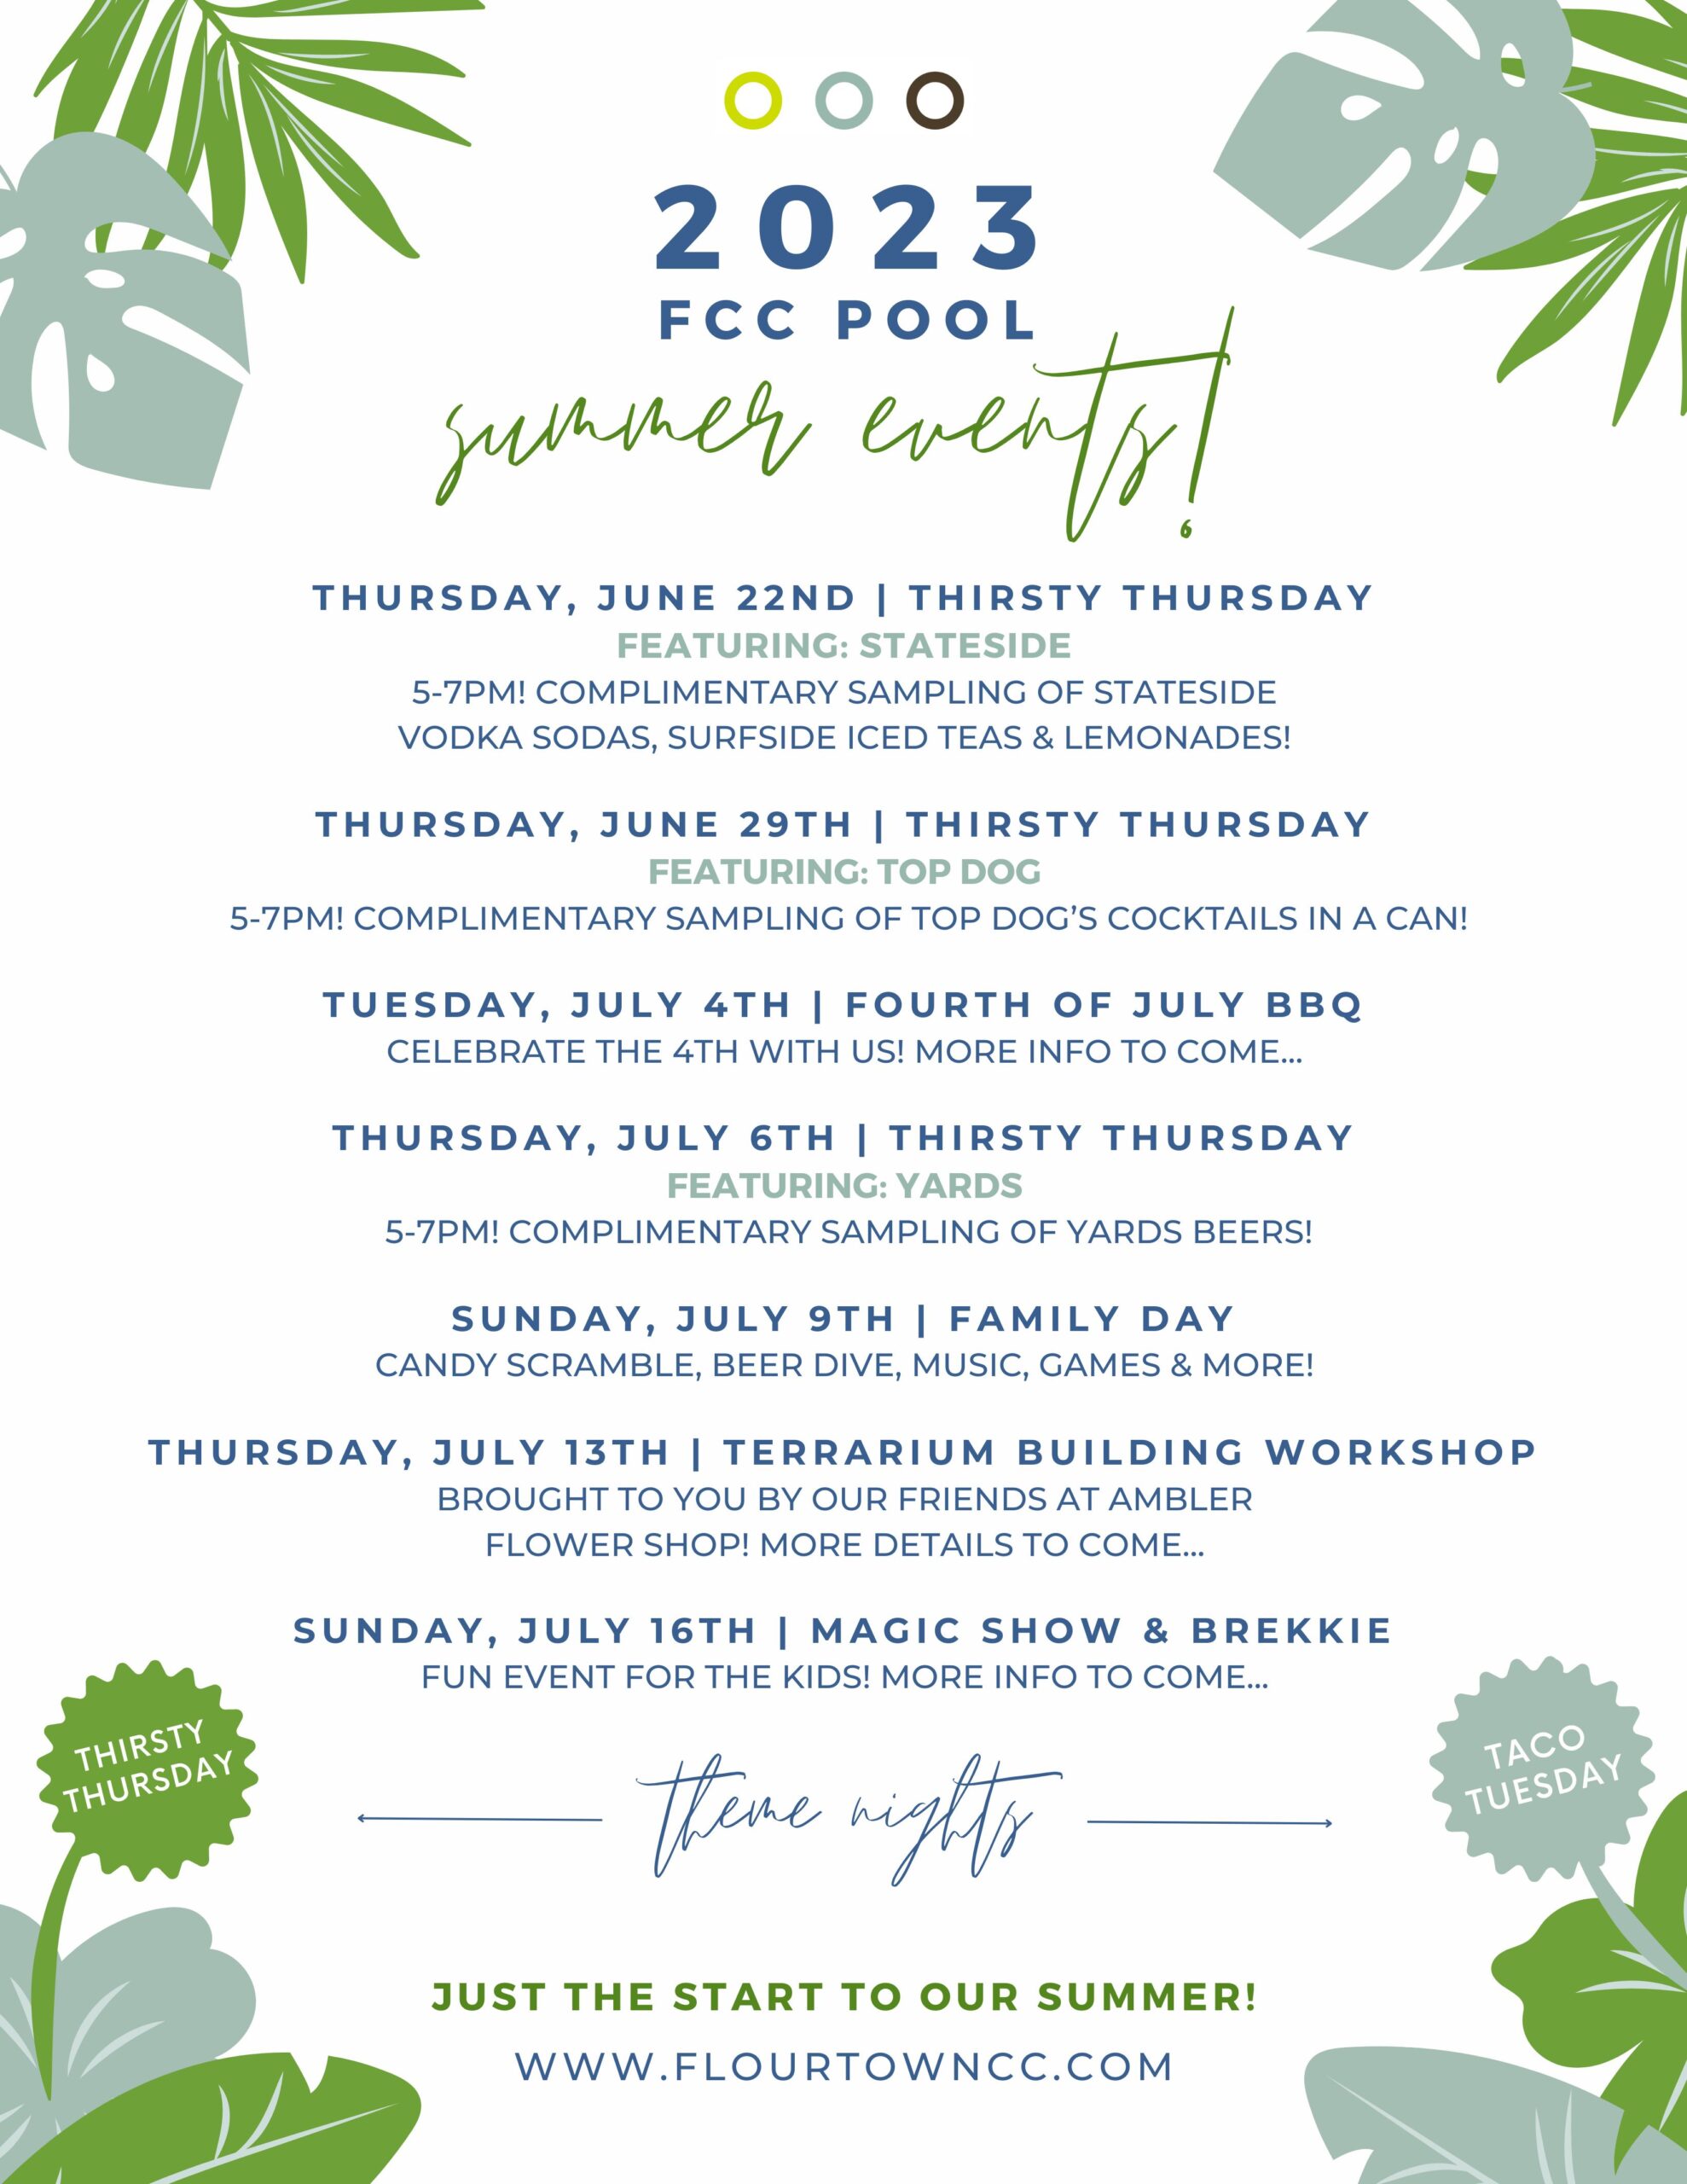 FCC Events + Specials Summer ’23! Flourtown Country Club